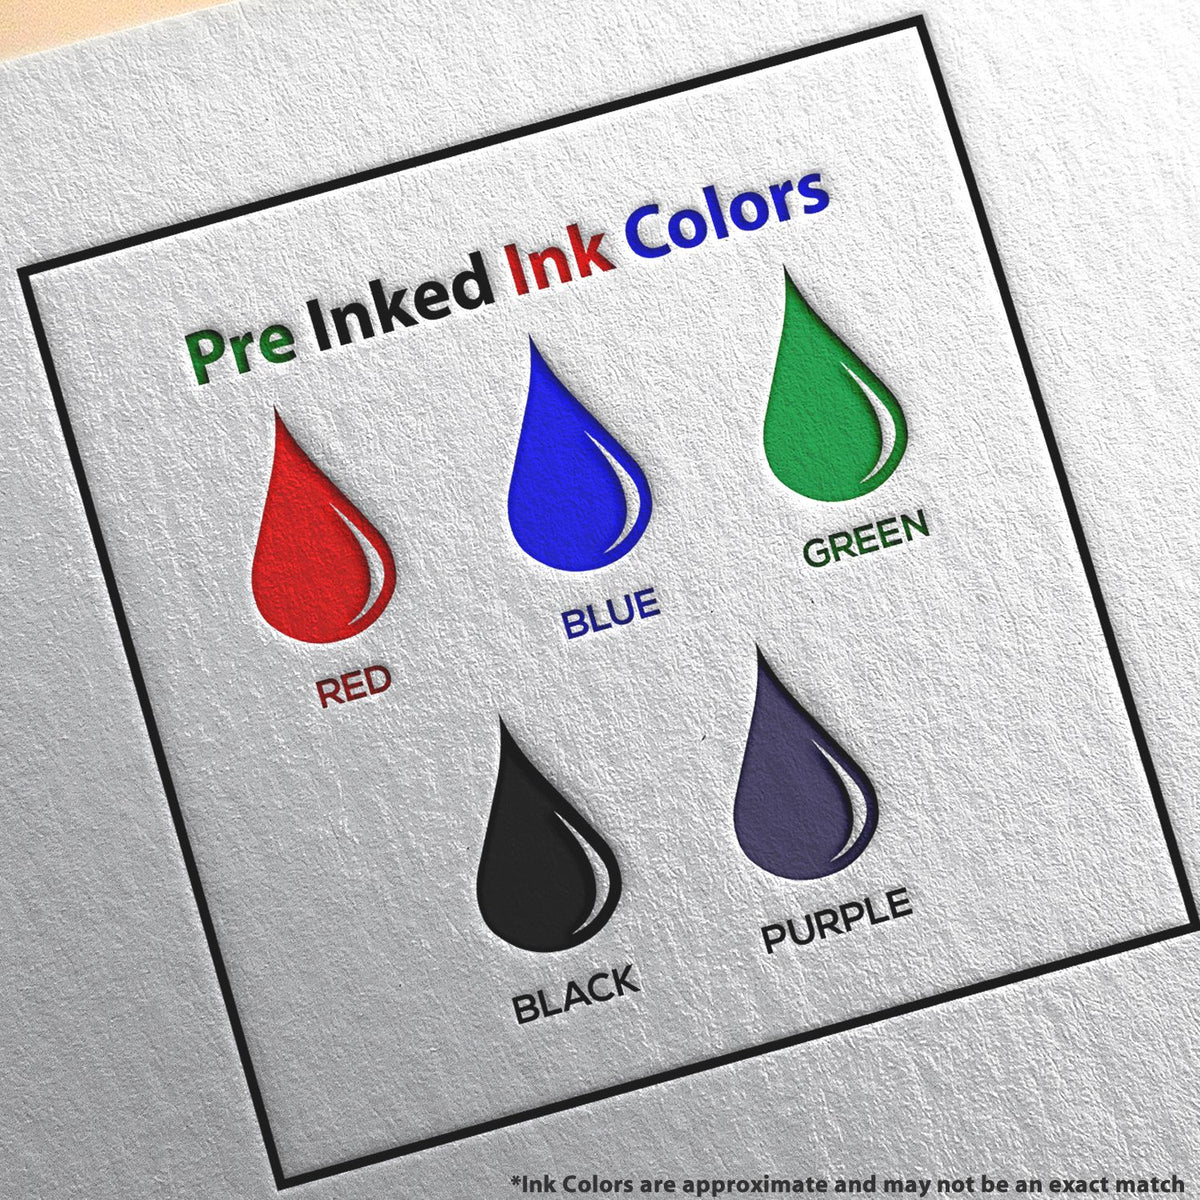 A picture showing the different ink colors or hues available for the Slim Pre-Inked Indiana Professional Engineer Seal Stamp product.